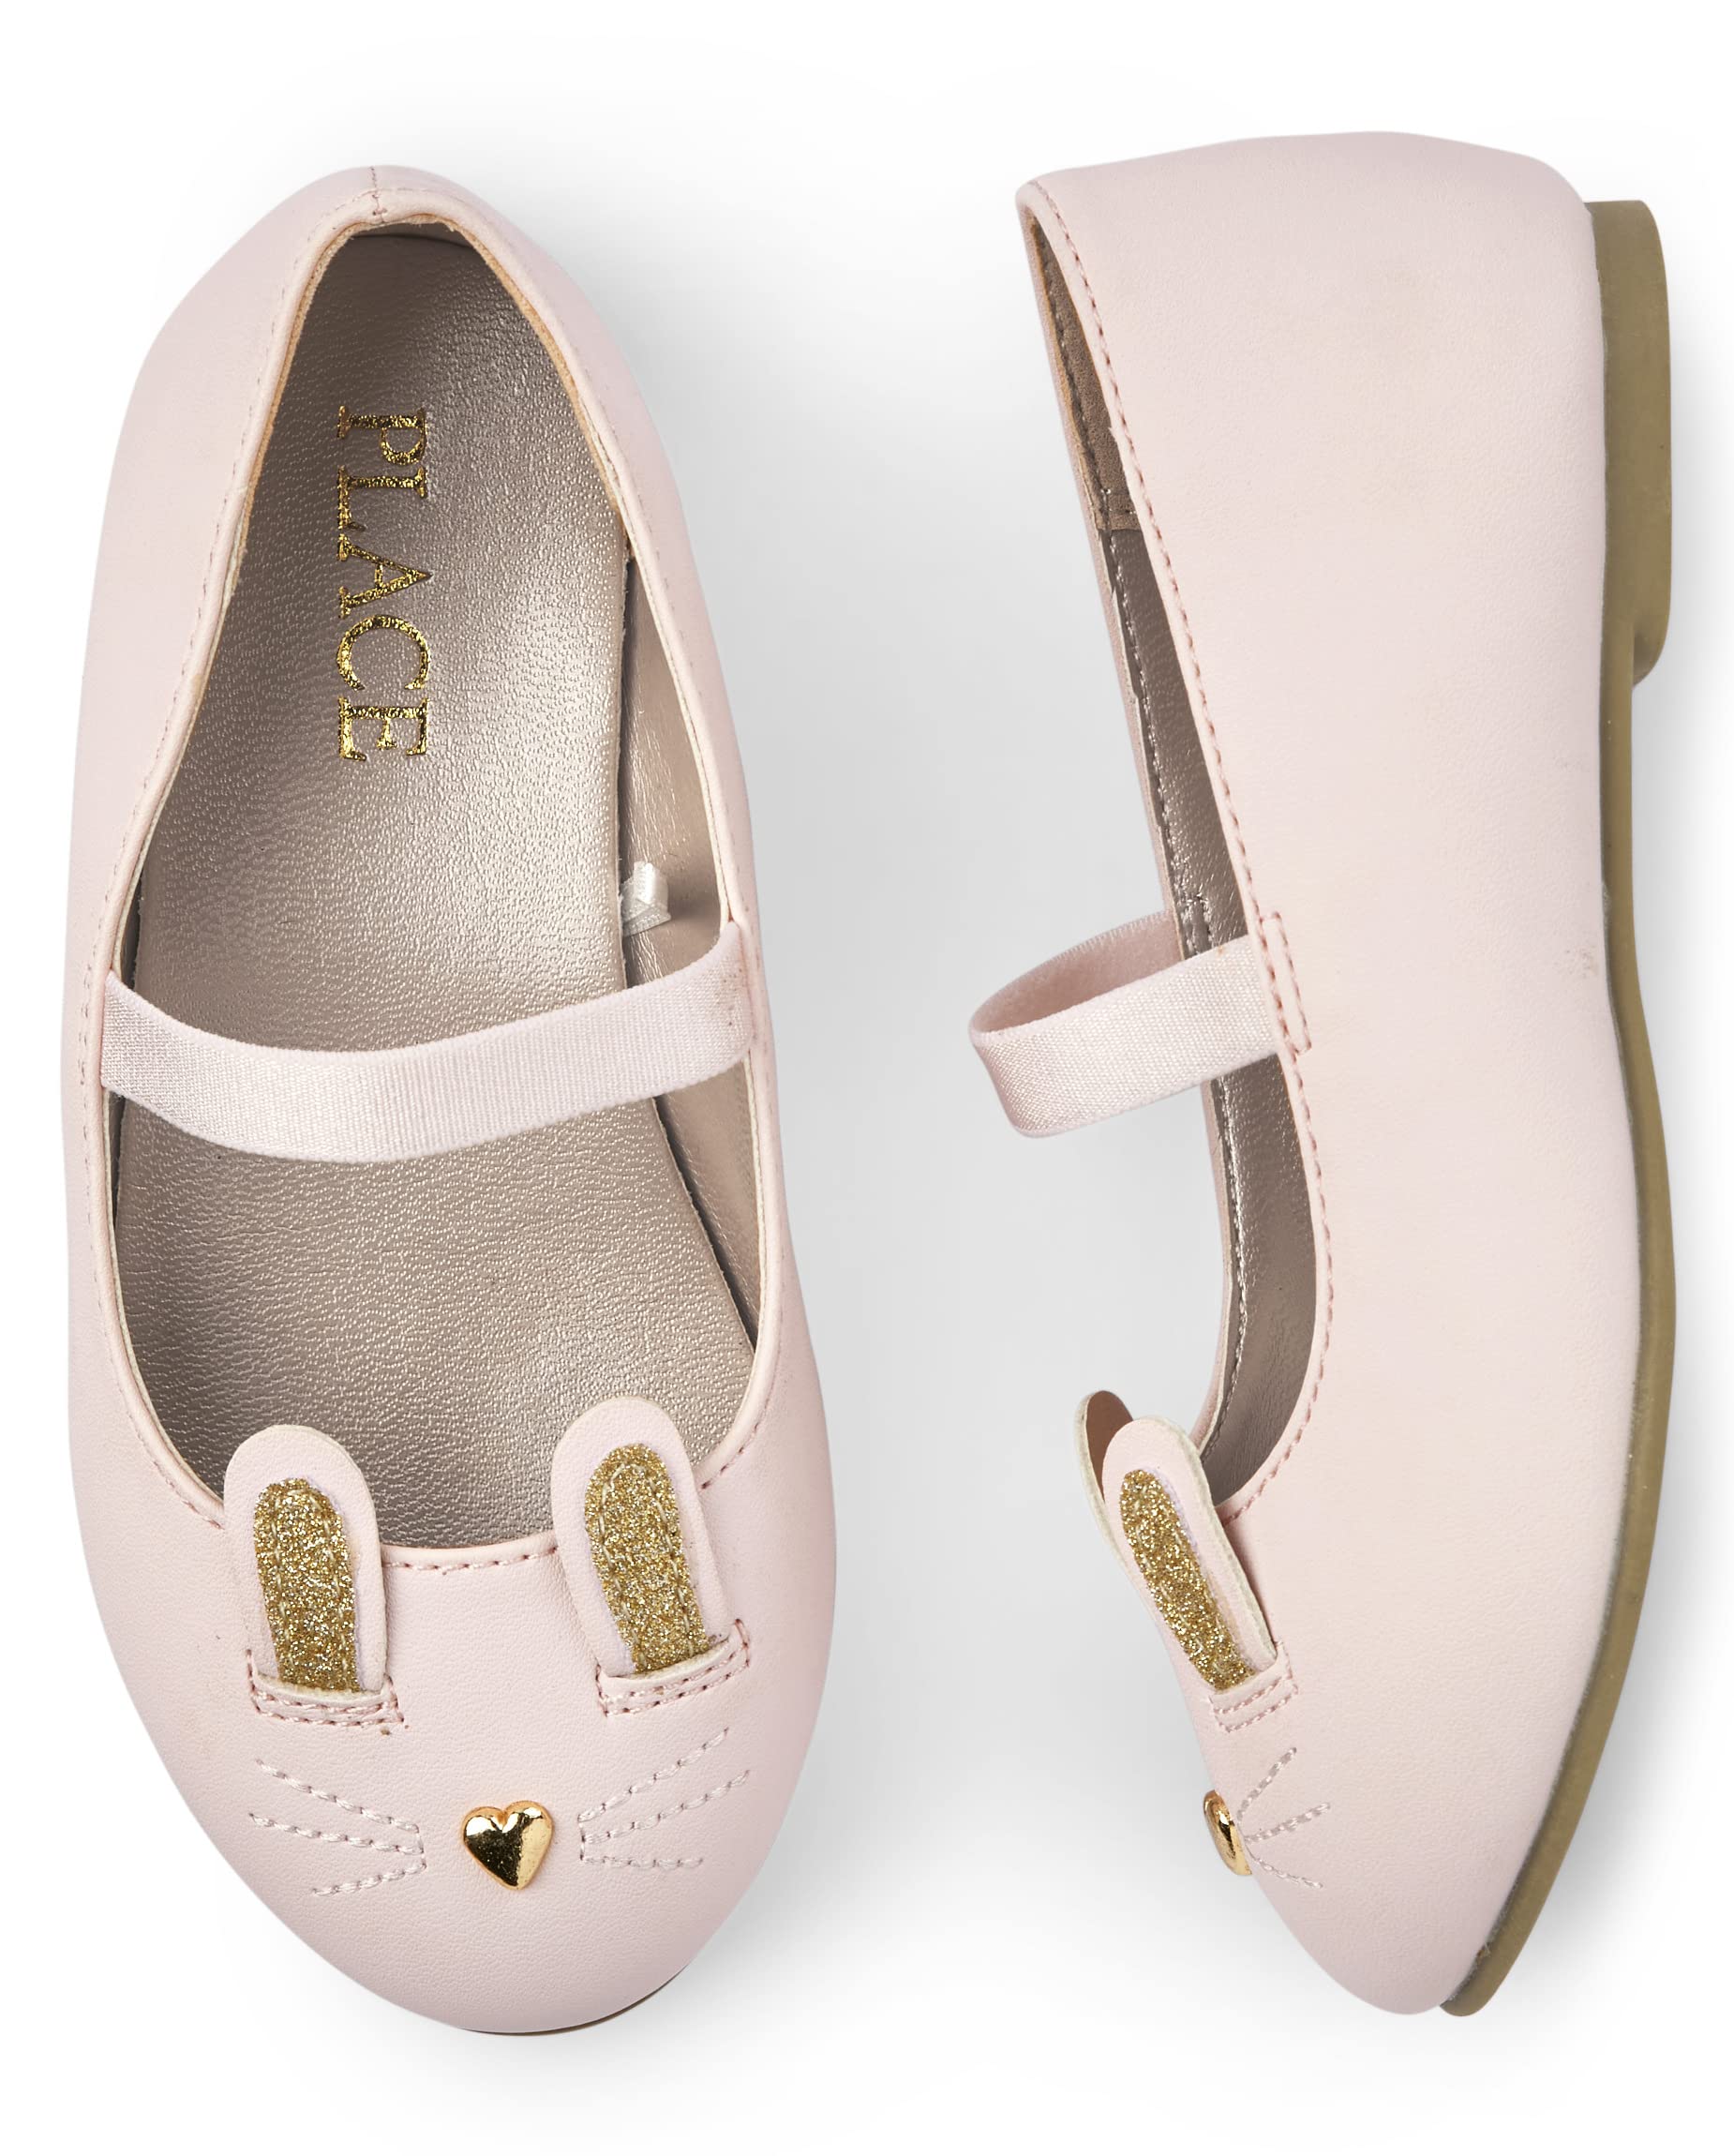 The Children's Place Unisex-Child and Toddler Girls Flats Ballet